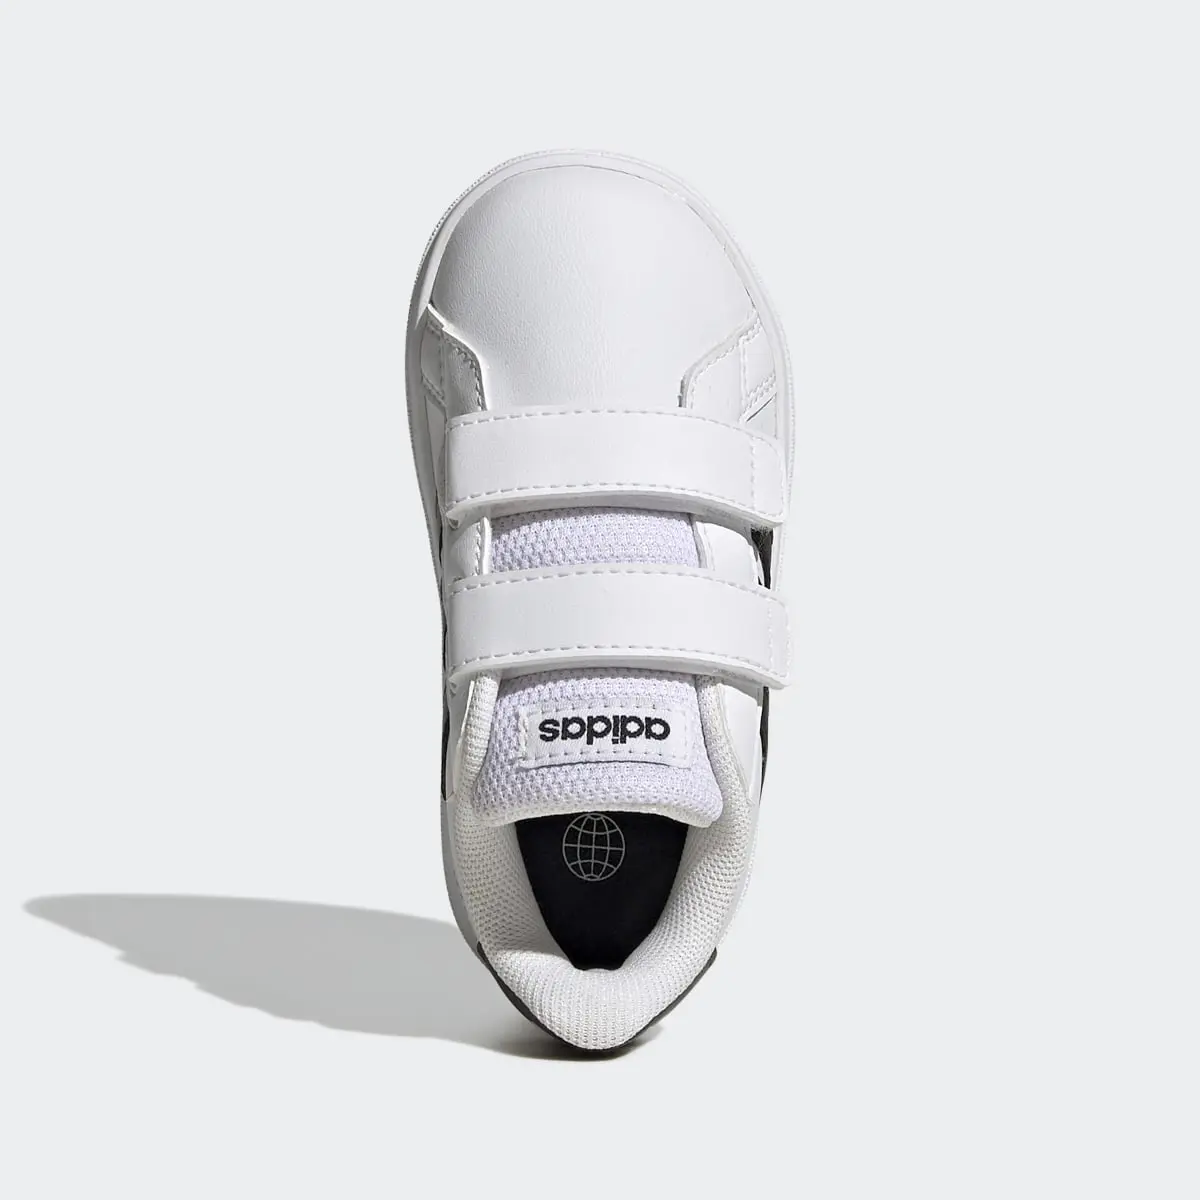 Adidas Buty Grand Court Lifestyle Hook and Loop. 3